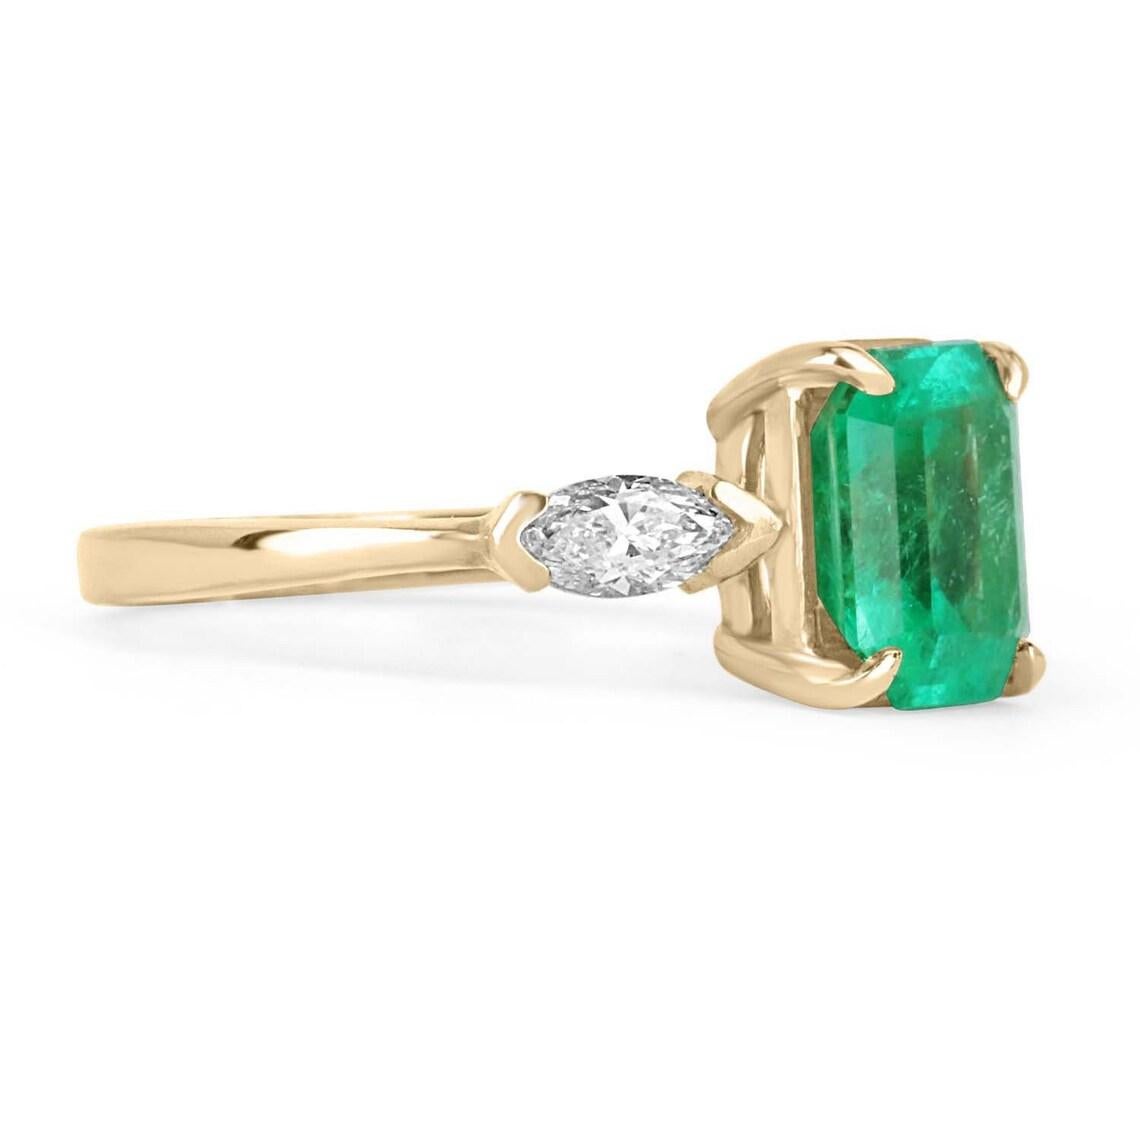 A classic Colombian emerald and diamond engagement, statement, or right-hand ring. Dexterously crafted in gleaming 18K gold this ring features a natural emerald cut from the famous Muzo mines of Colombia. Set in a secure prong setting, this